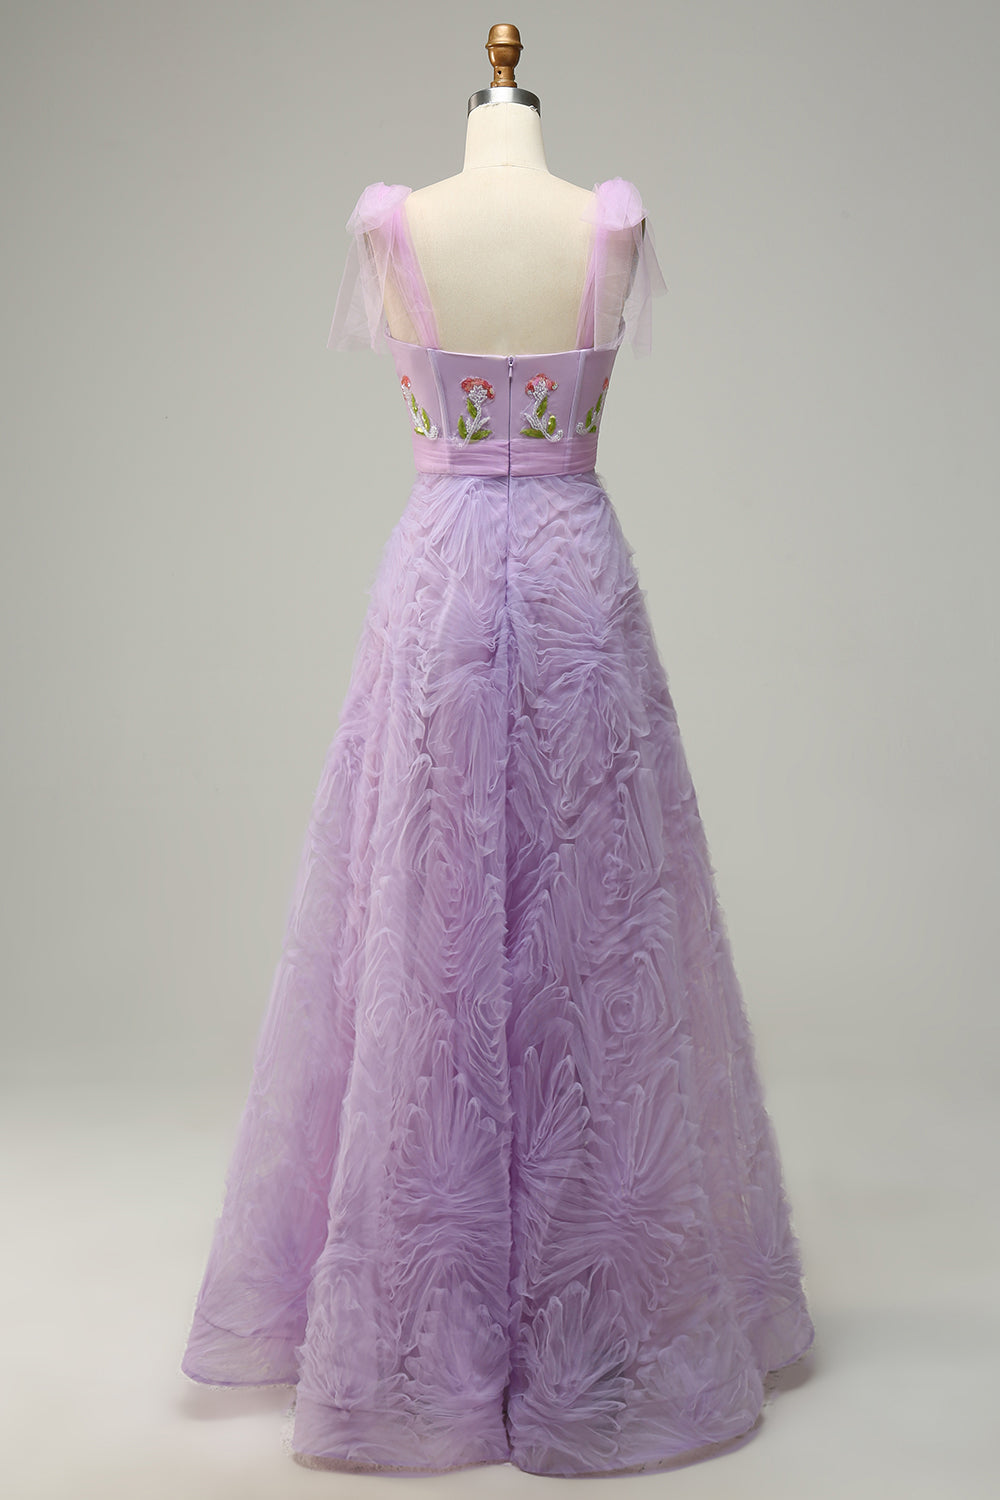 A-Line Purple Tulle Prom Dress With Embroidery